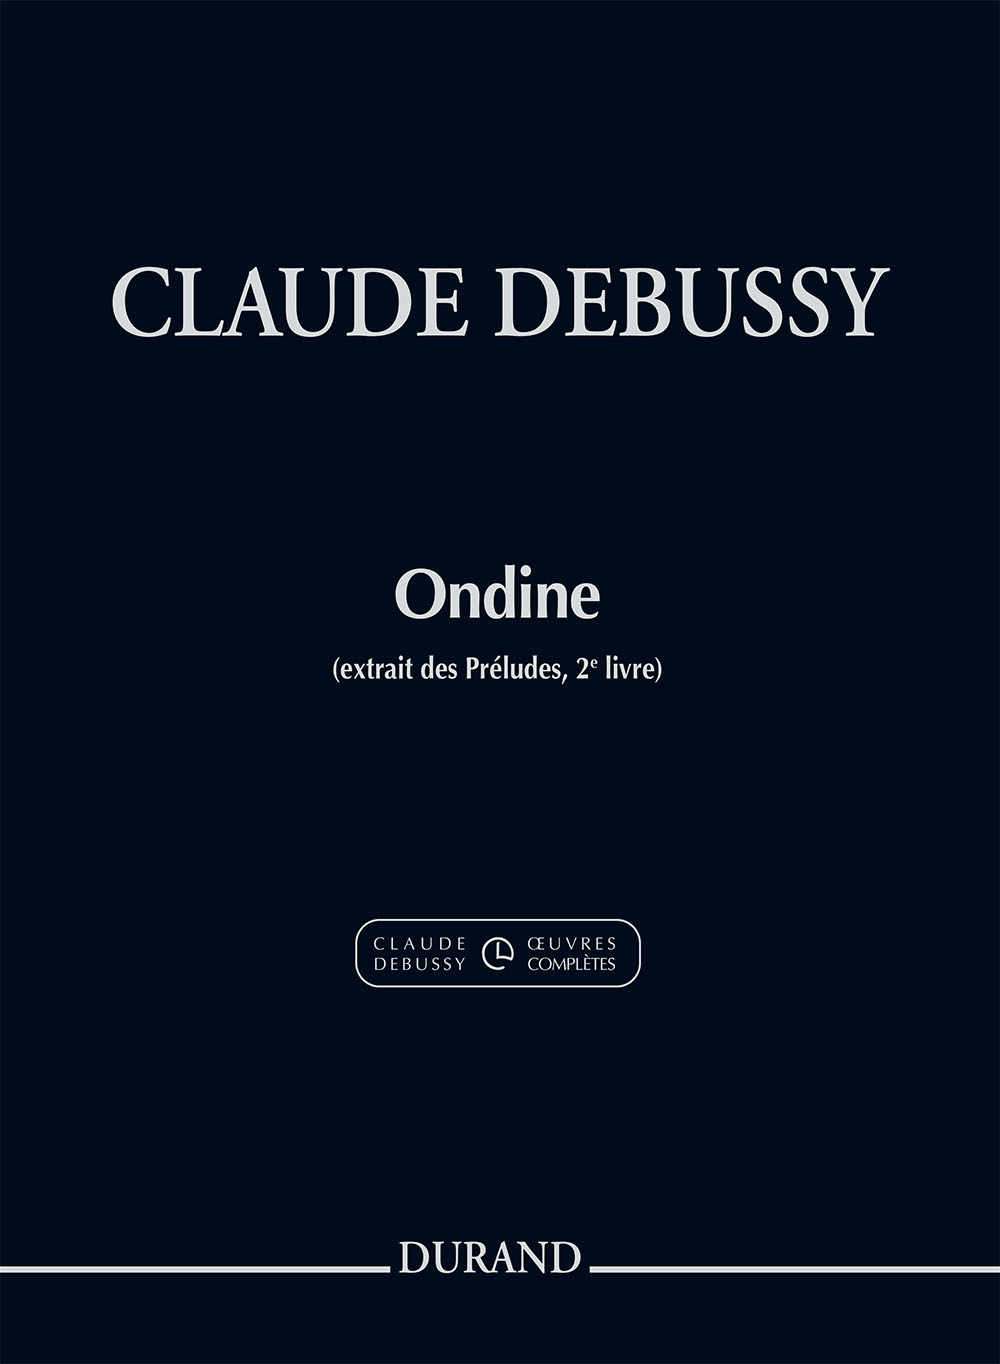 Claude Debussy: Ondine - Extrait Du - Excerpt From Srie I Vol. 5: Piano: